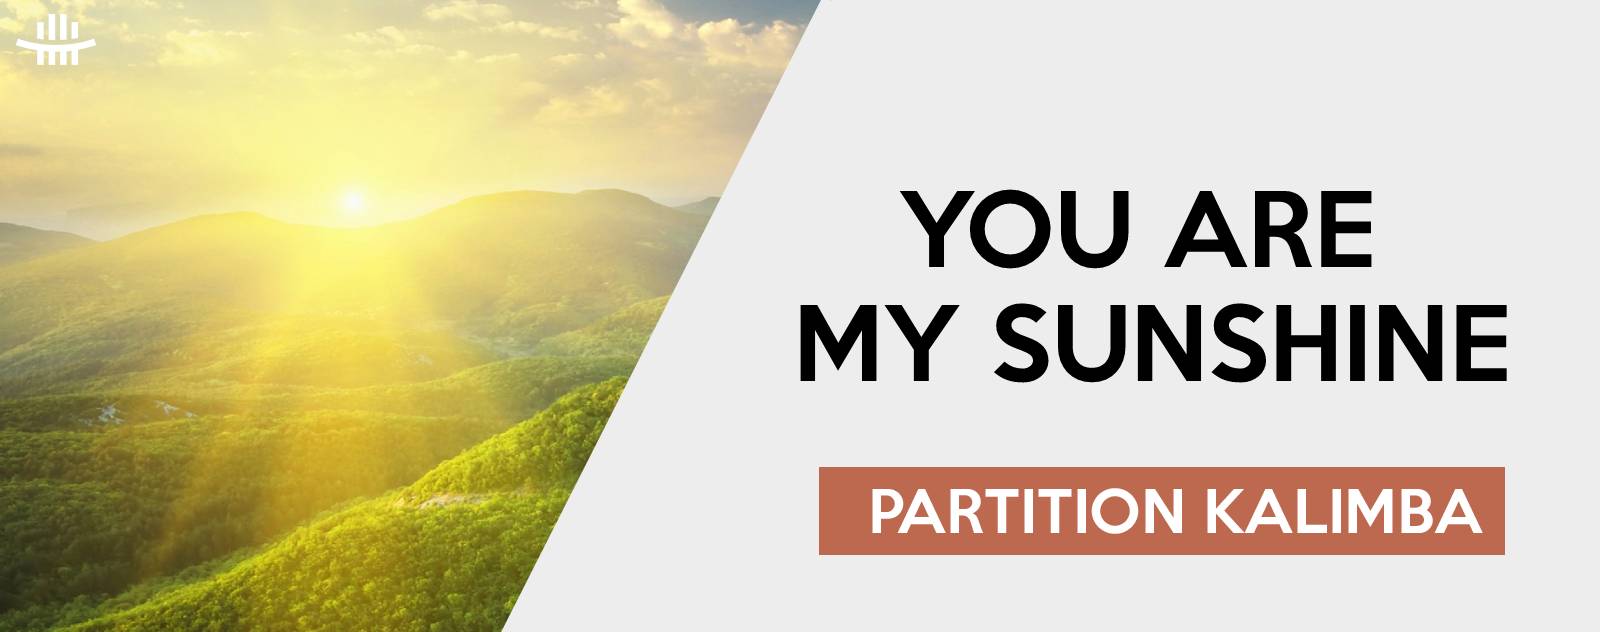 You are my sunshine | Partition kalimba